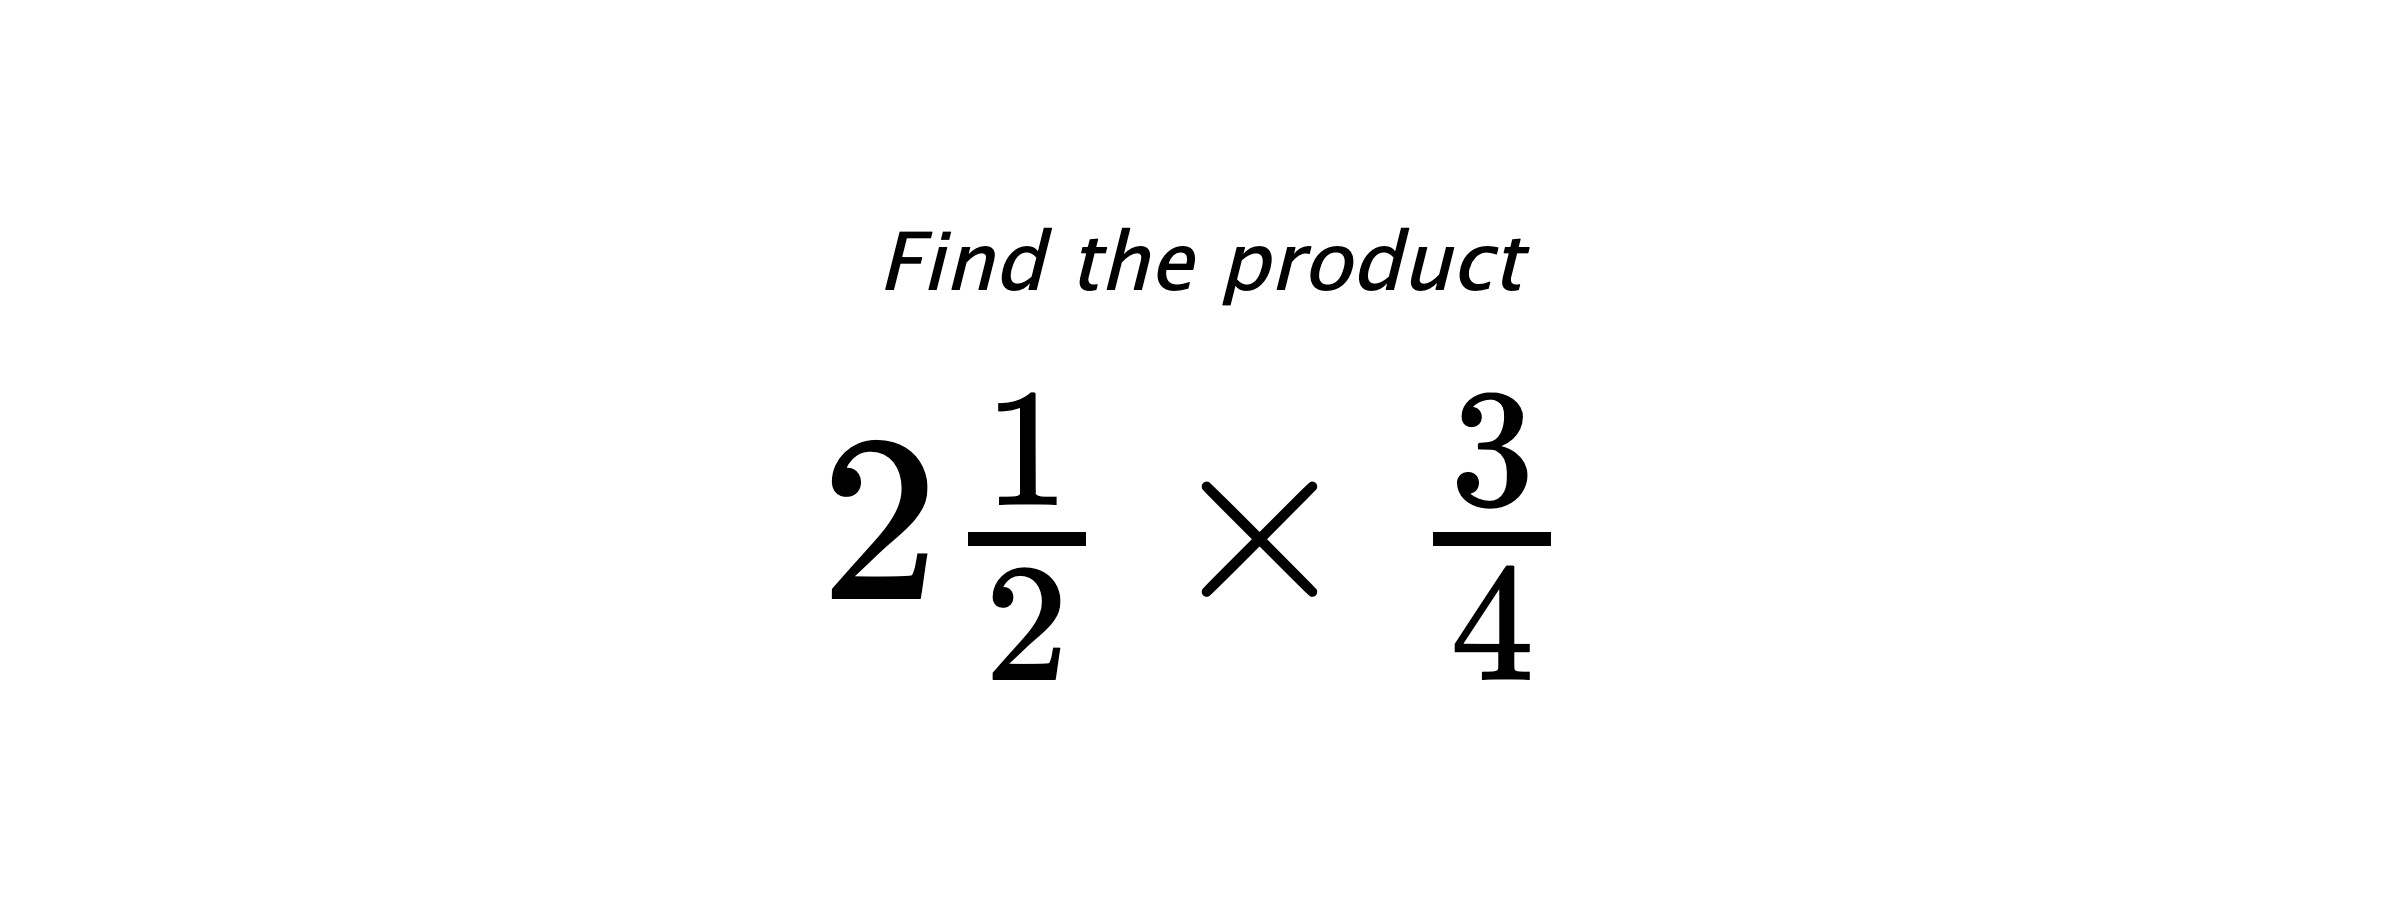 Find the product $ 2\frac{1}{2} \times \frac{3}{4} $